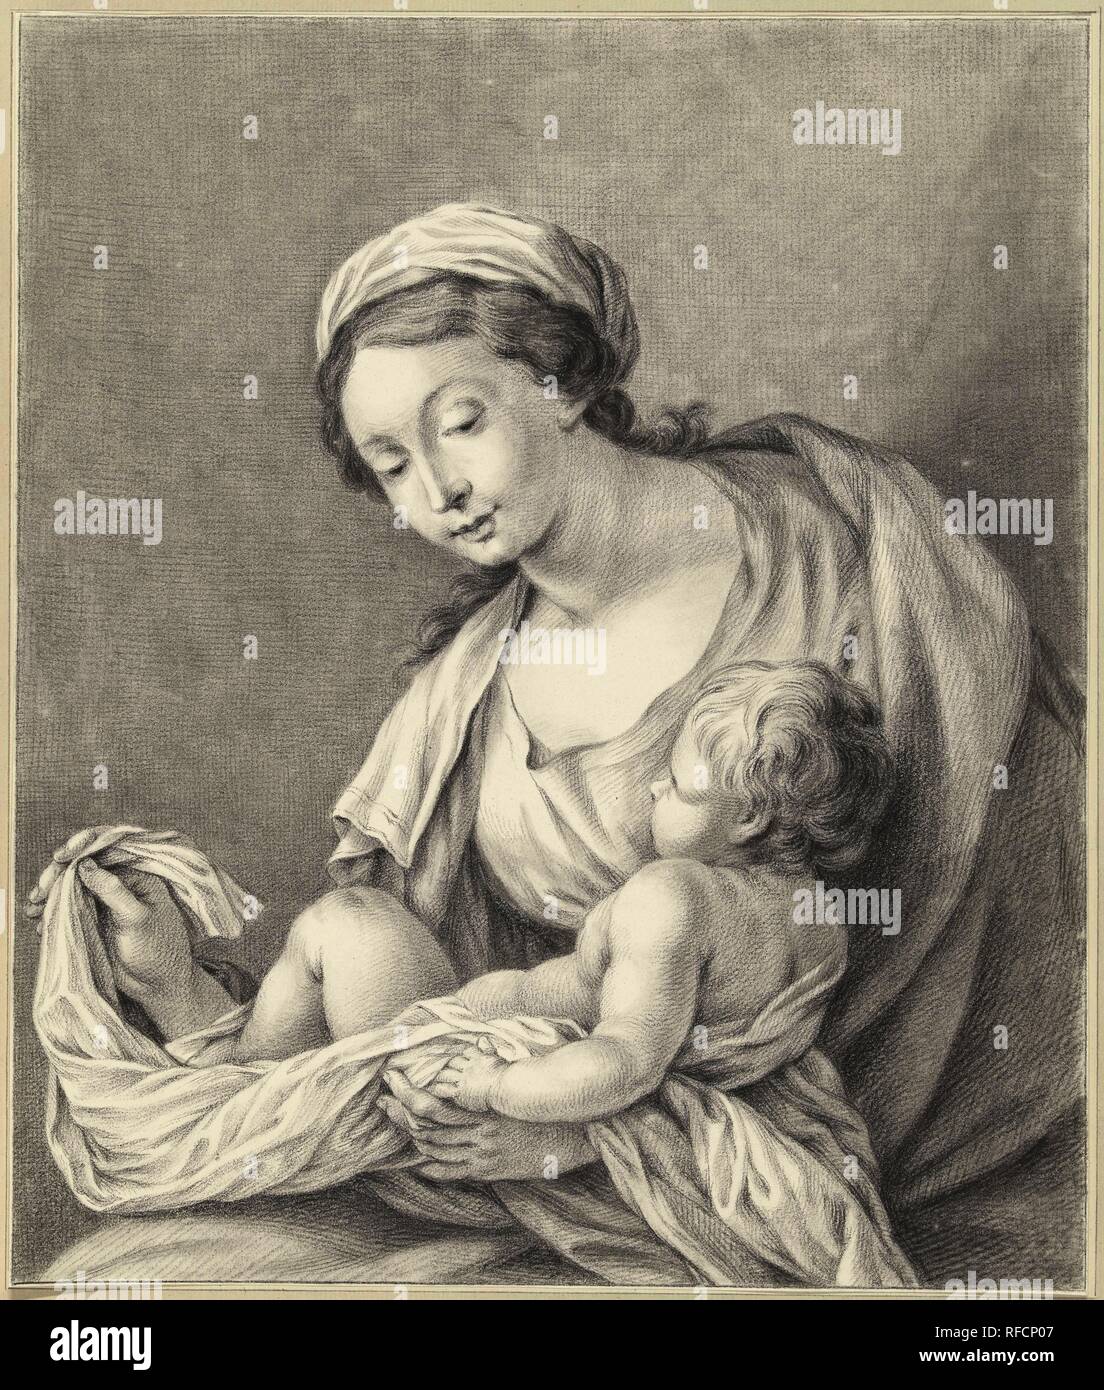 Maria with child. Draughtsman: Abraham Delfos. After Simon Vouet. Dating: 1741 - 1820. Measurements: h 383 mm × w 323 mm. Museum: Rijksmuseum, Amsterdam. Stock Photo